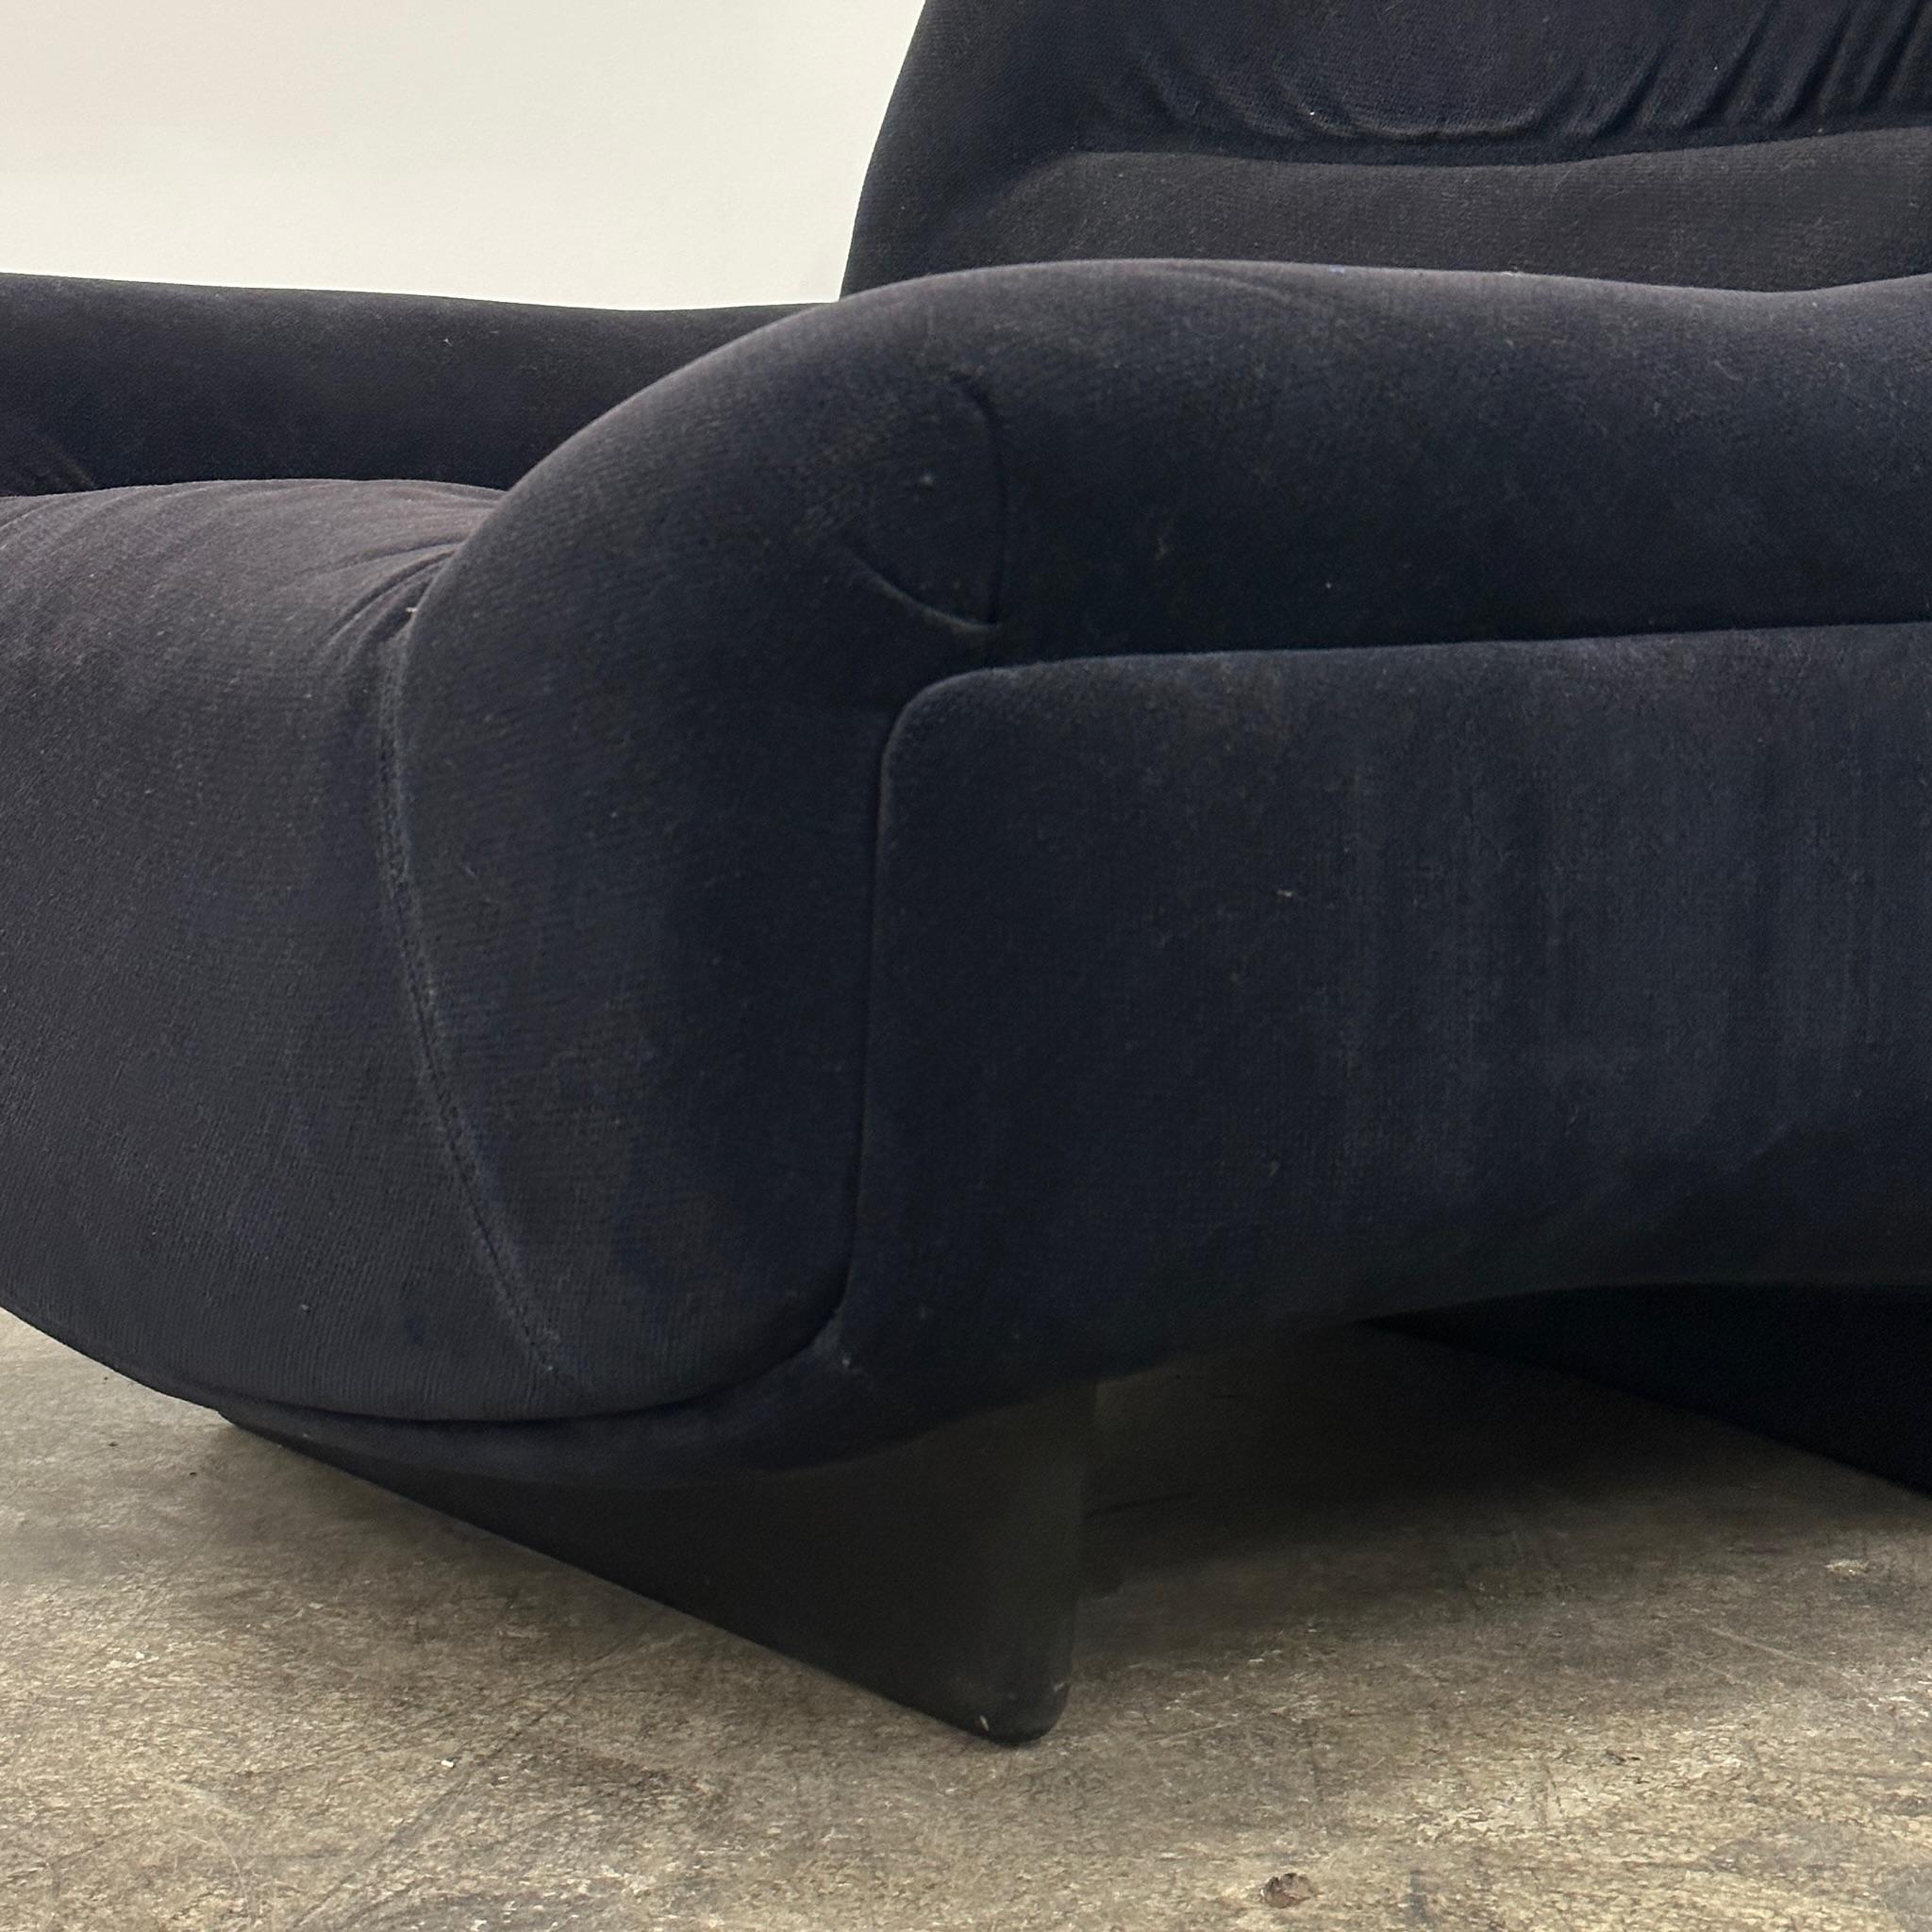 Upholstered in a navy blue fabric. Matching sleeper sofa available as well. On wooden molded base.